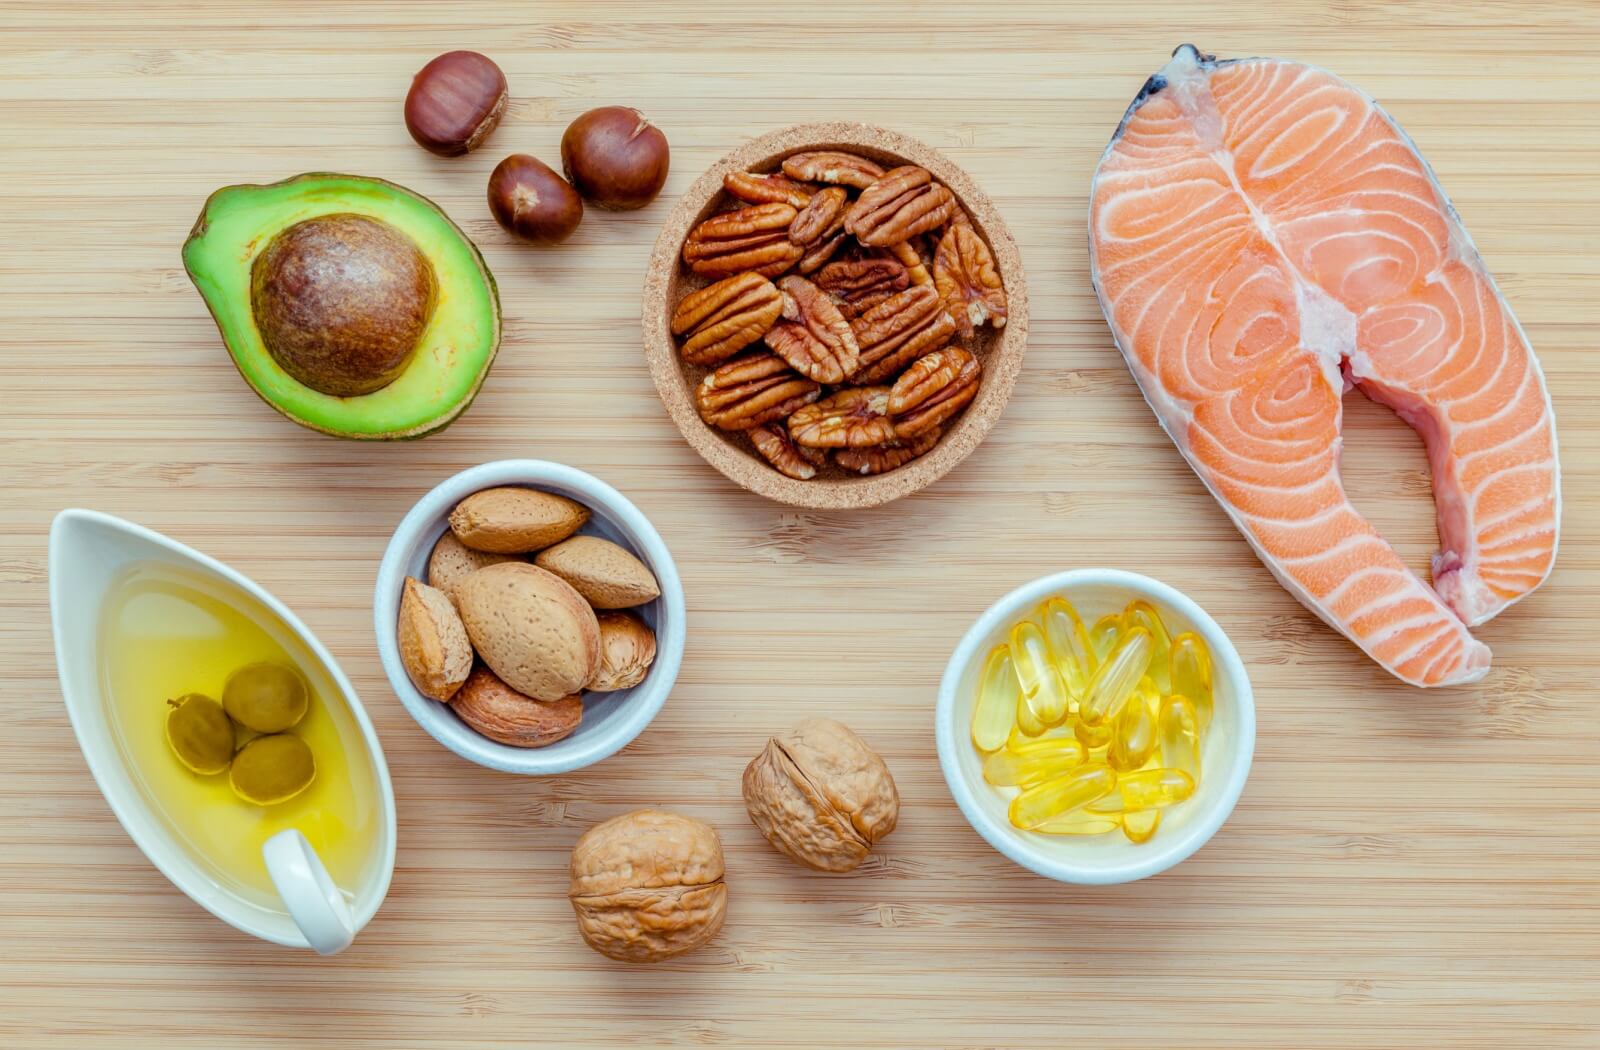 An assortment of food rich in Omega-3 fatty acids and a bowl full of Omega-3 supplements on a wooden backdrop.